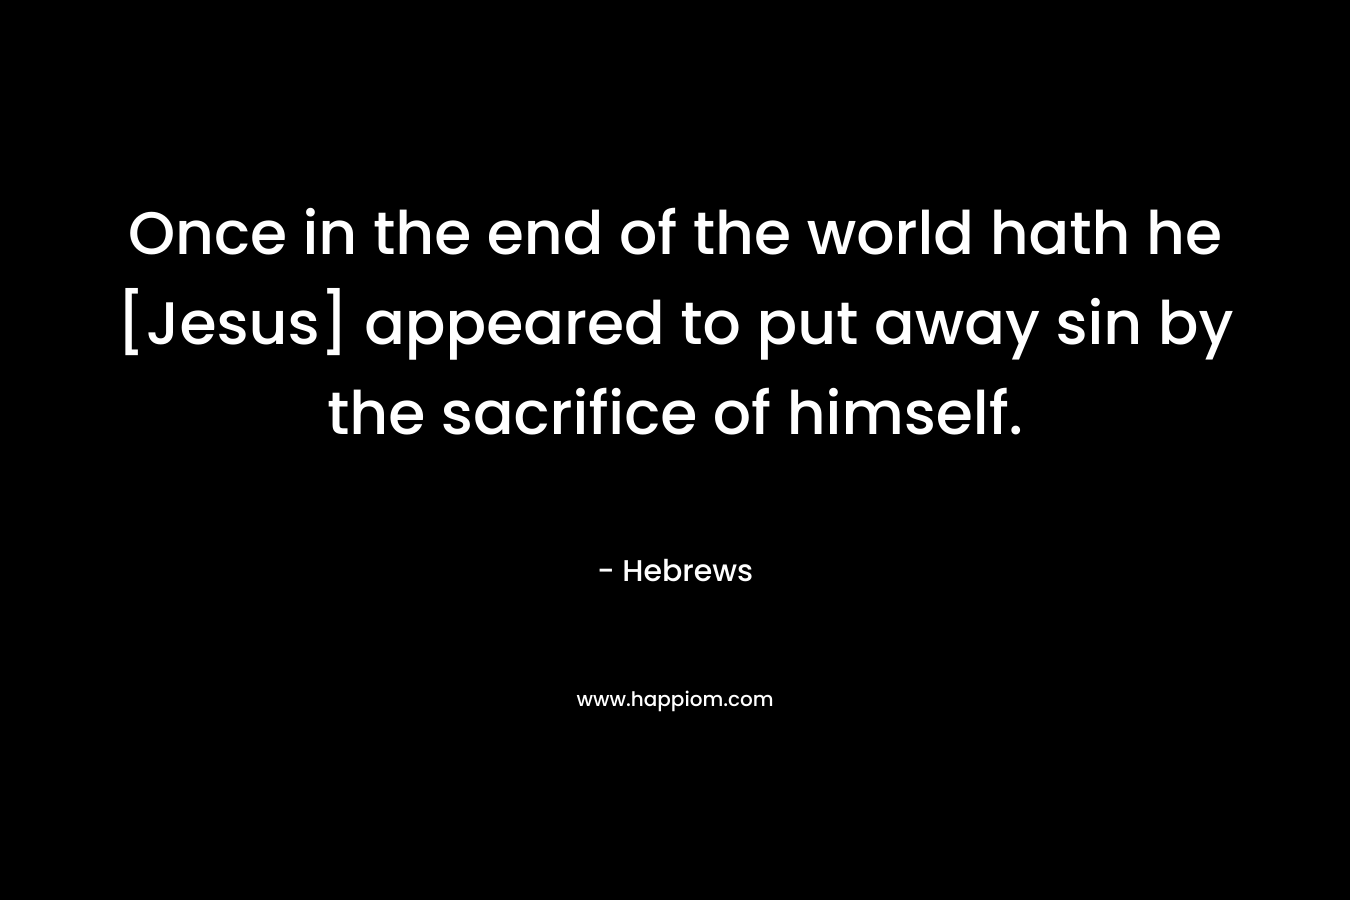 Once in the end of the world hath he [Jesus] appeared to put away sin by the sacrifice of himself. – Hebrews